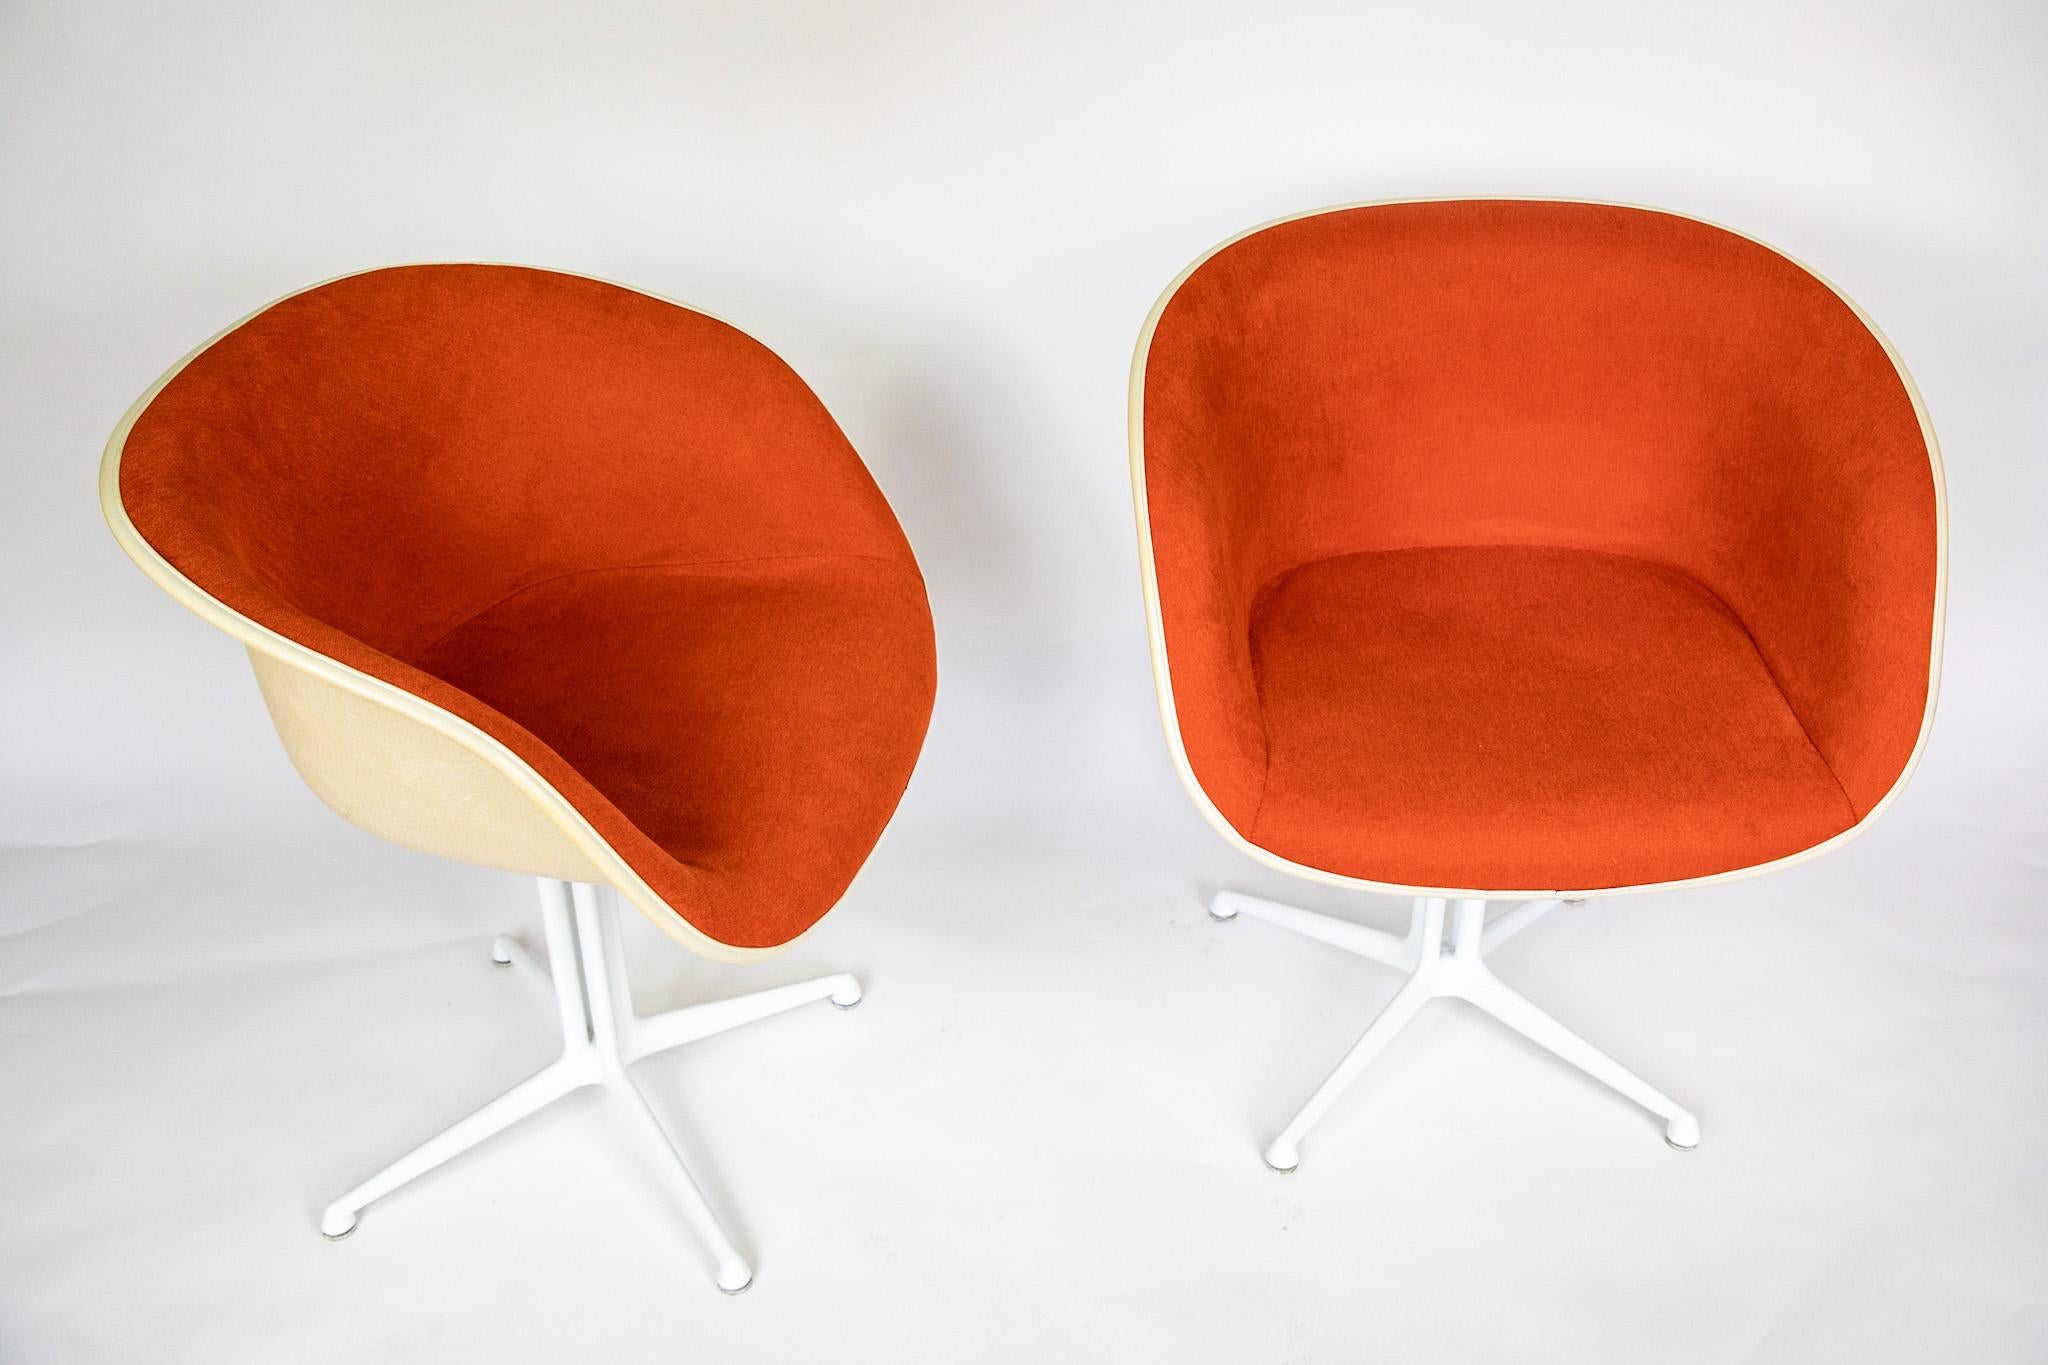 Mid Century Dining Chairs La Fonda by Eames for Vitra, Orange, Fiberglass, 1960s.

This lovely set of two La Fonda armchairs are the absolute eye catcher in every stylish room. They are reupholstered with a bright orange fabric and their typical